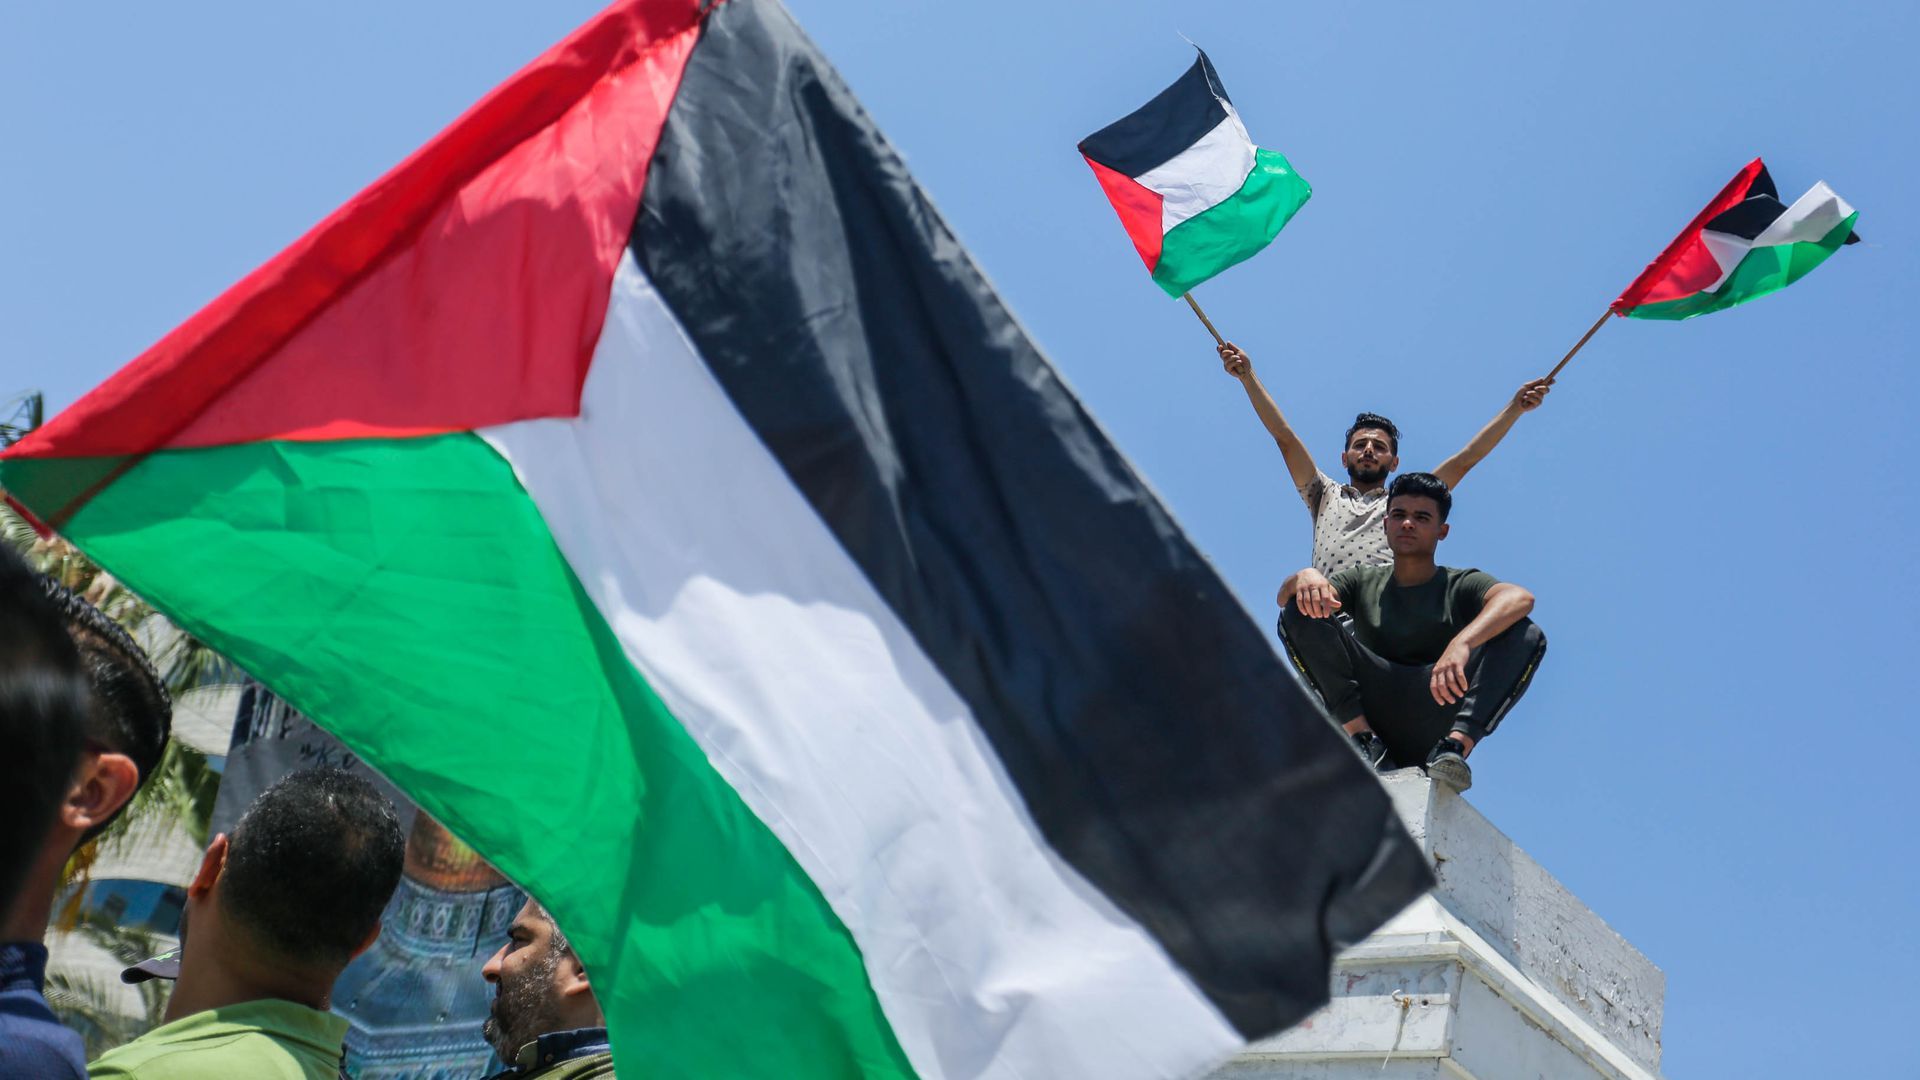 Palestinians wave flags at a demonstration in Gaza in June. Photo: Mahmoud Issa/SOPA Images/LightRocket via Getty Images